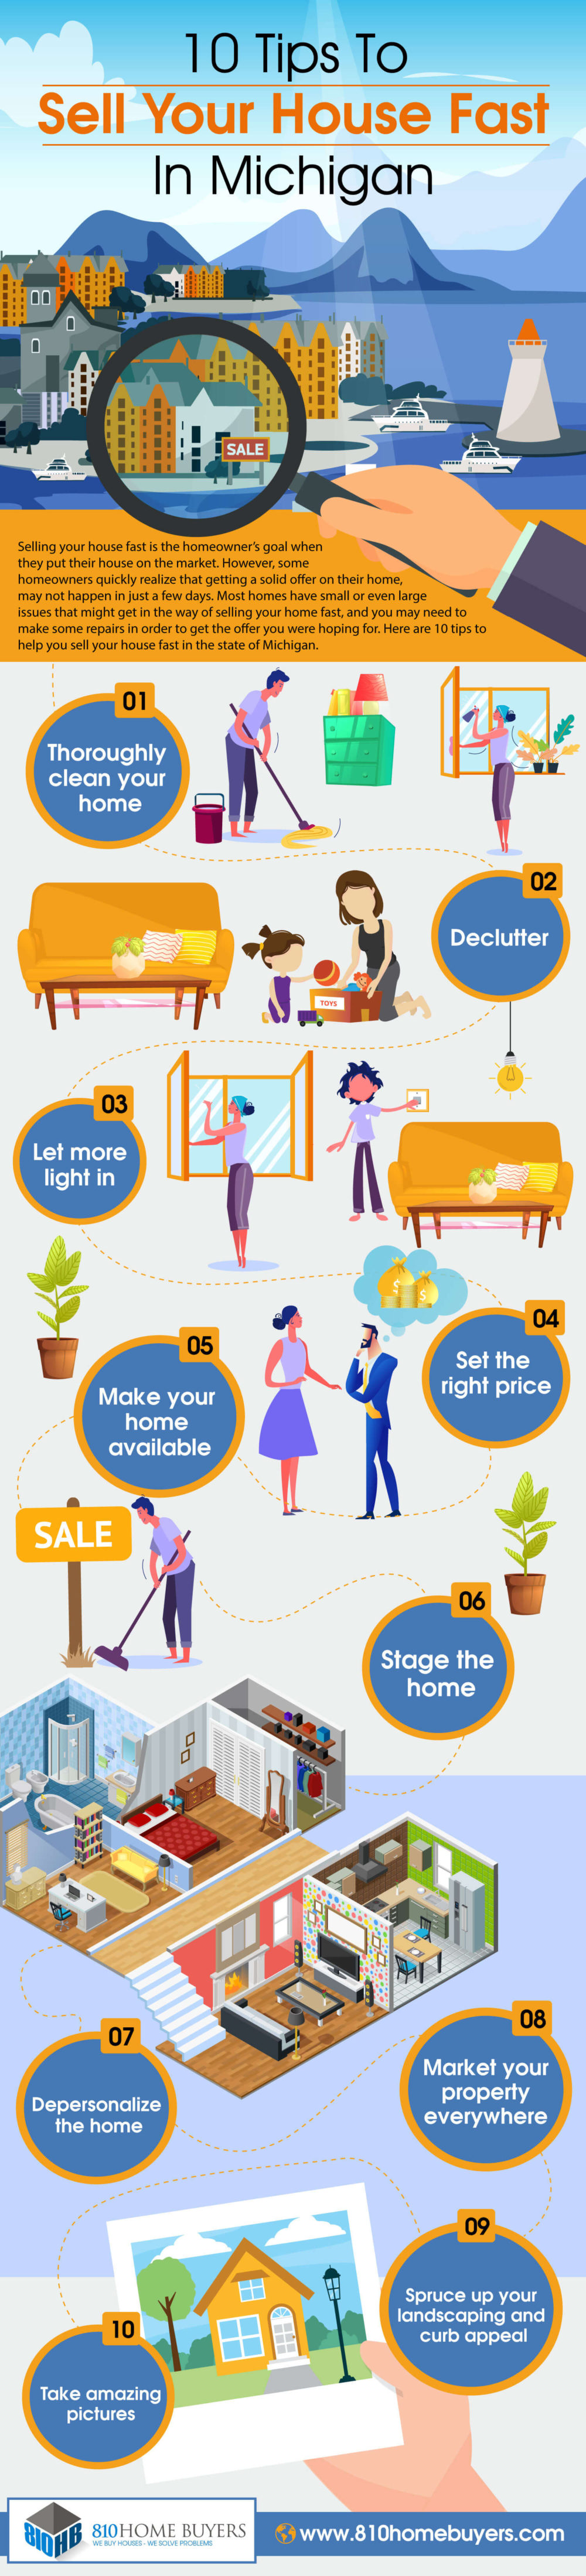 10 Tips To Sell Your House Fast In Michigan